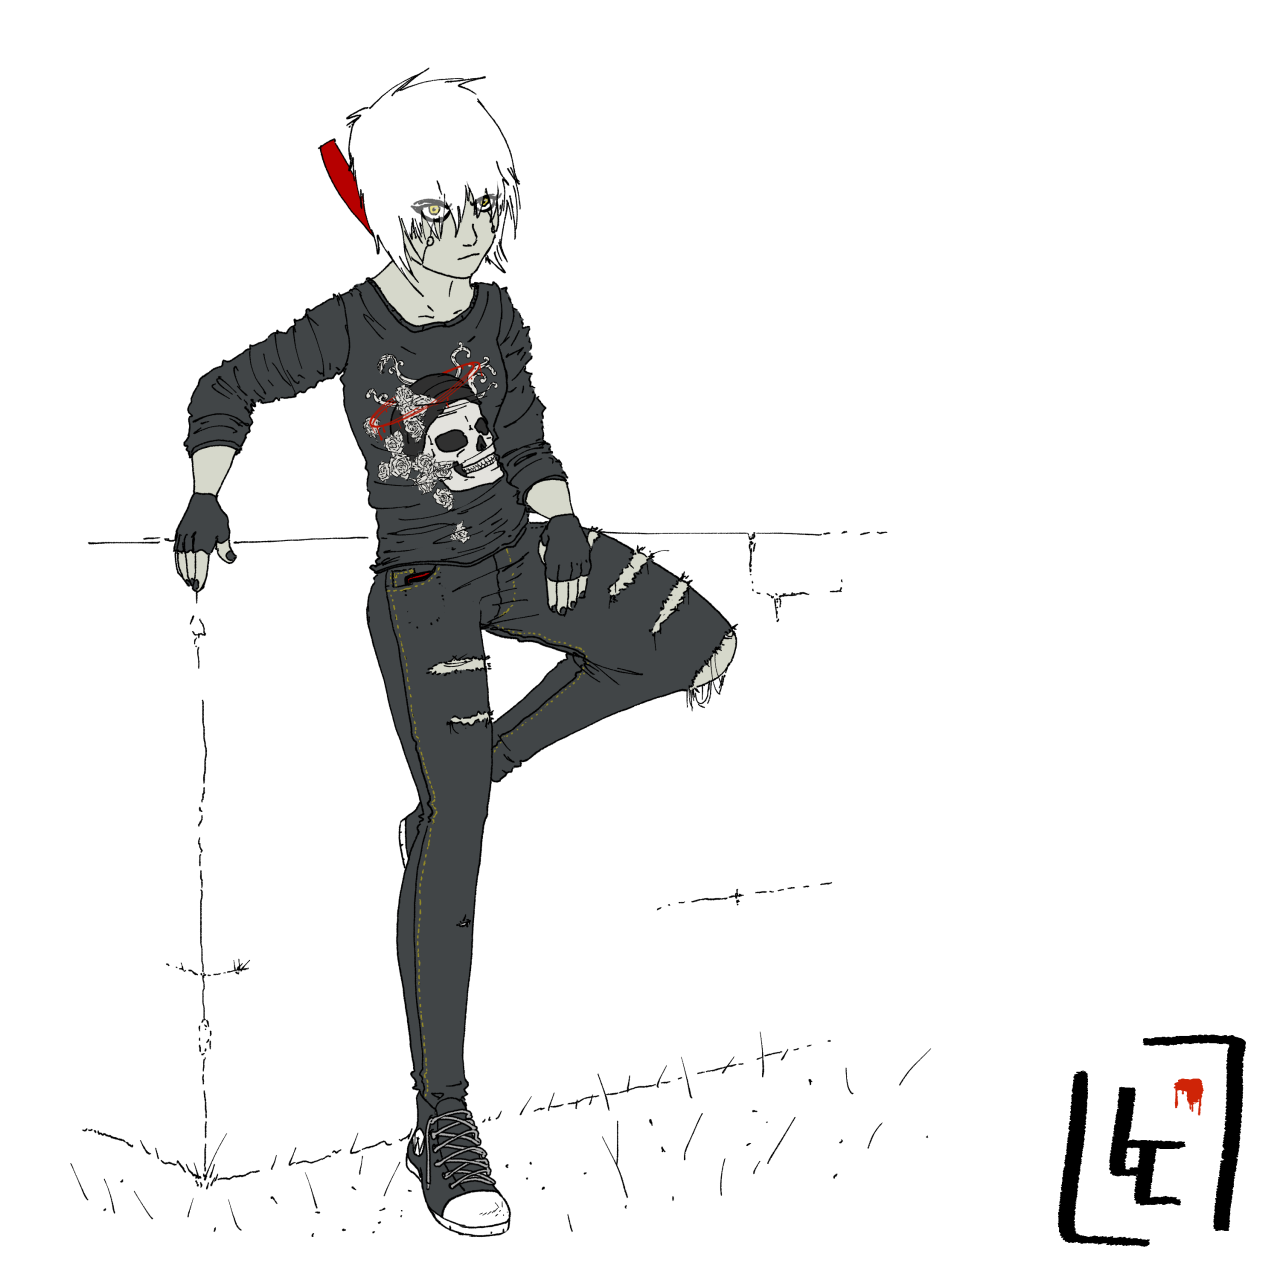 Feryuu, leaning against a well. She is wearing tighe ripped jeans, and a long sleeved tee with a picurte of a skull on it. The skull has a halo of blood.